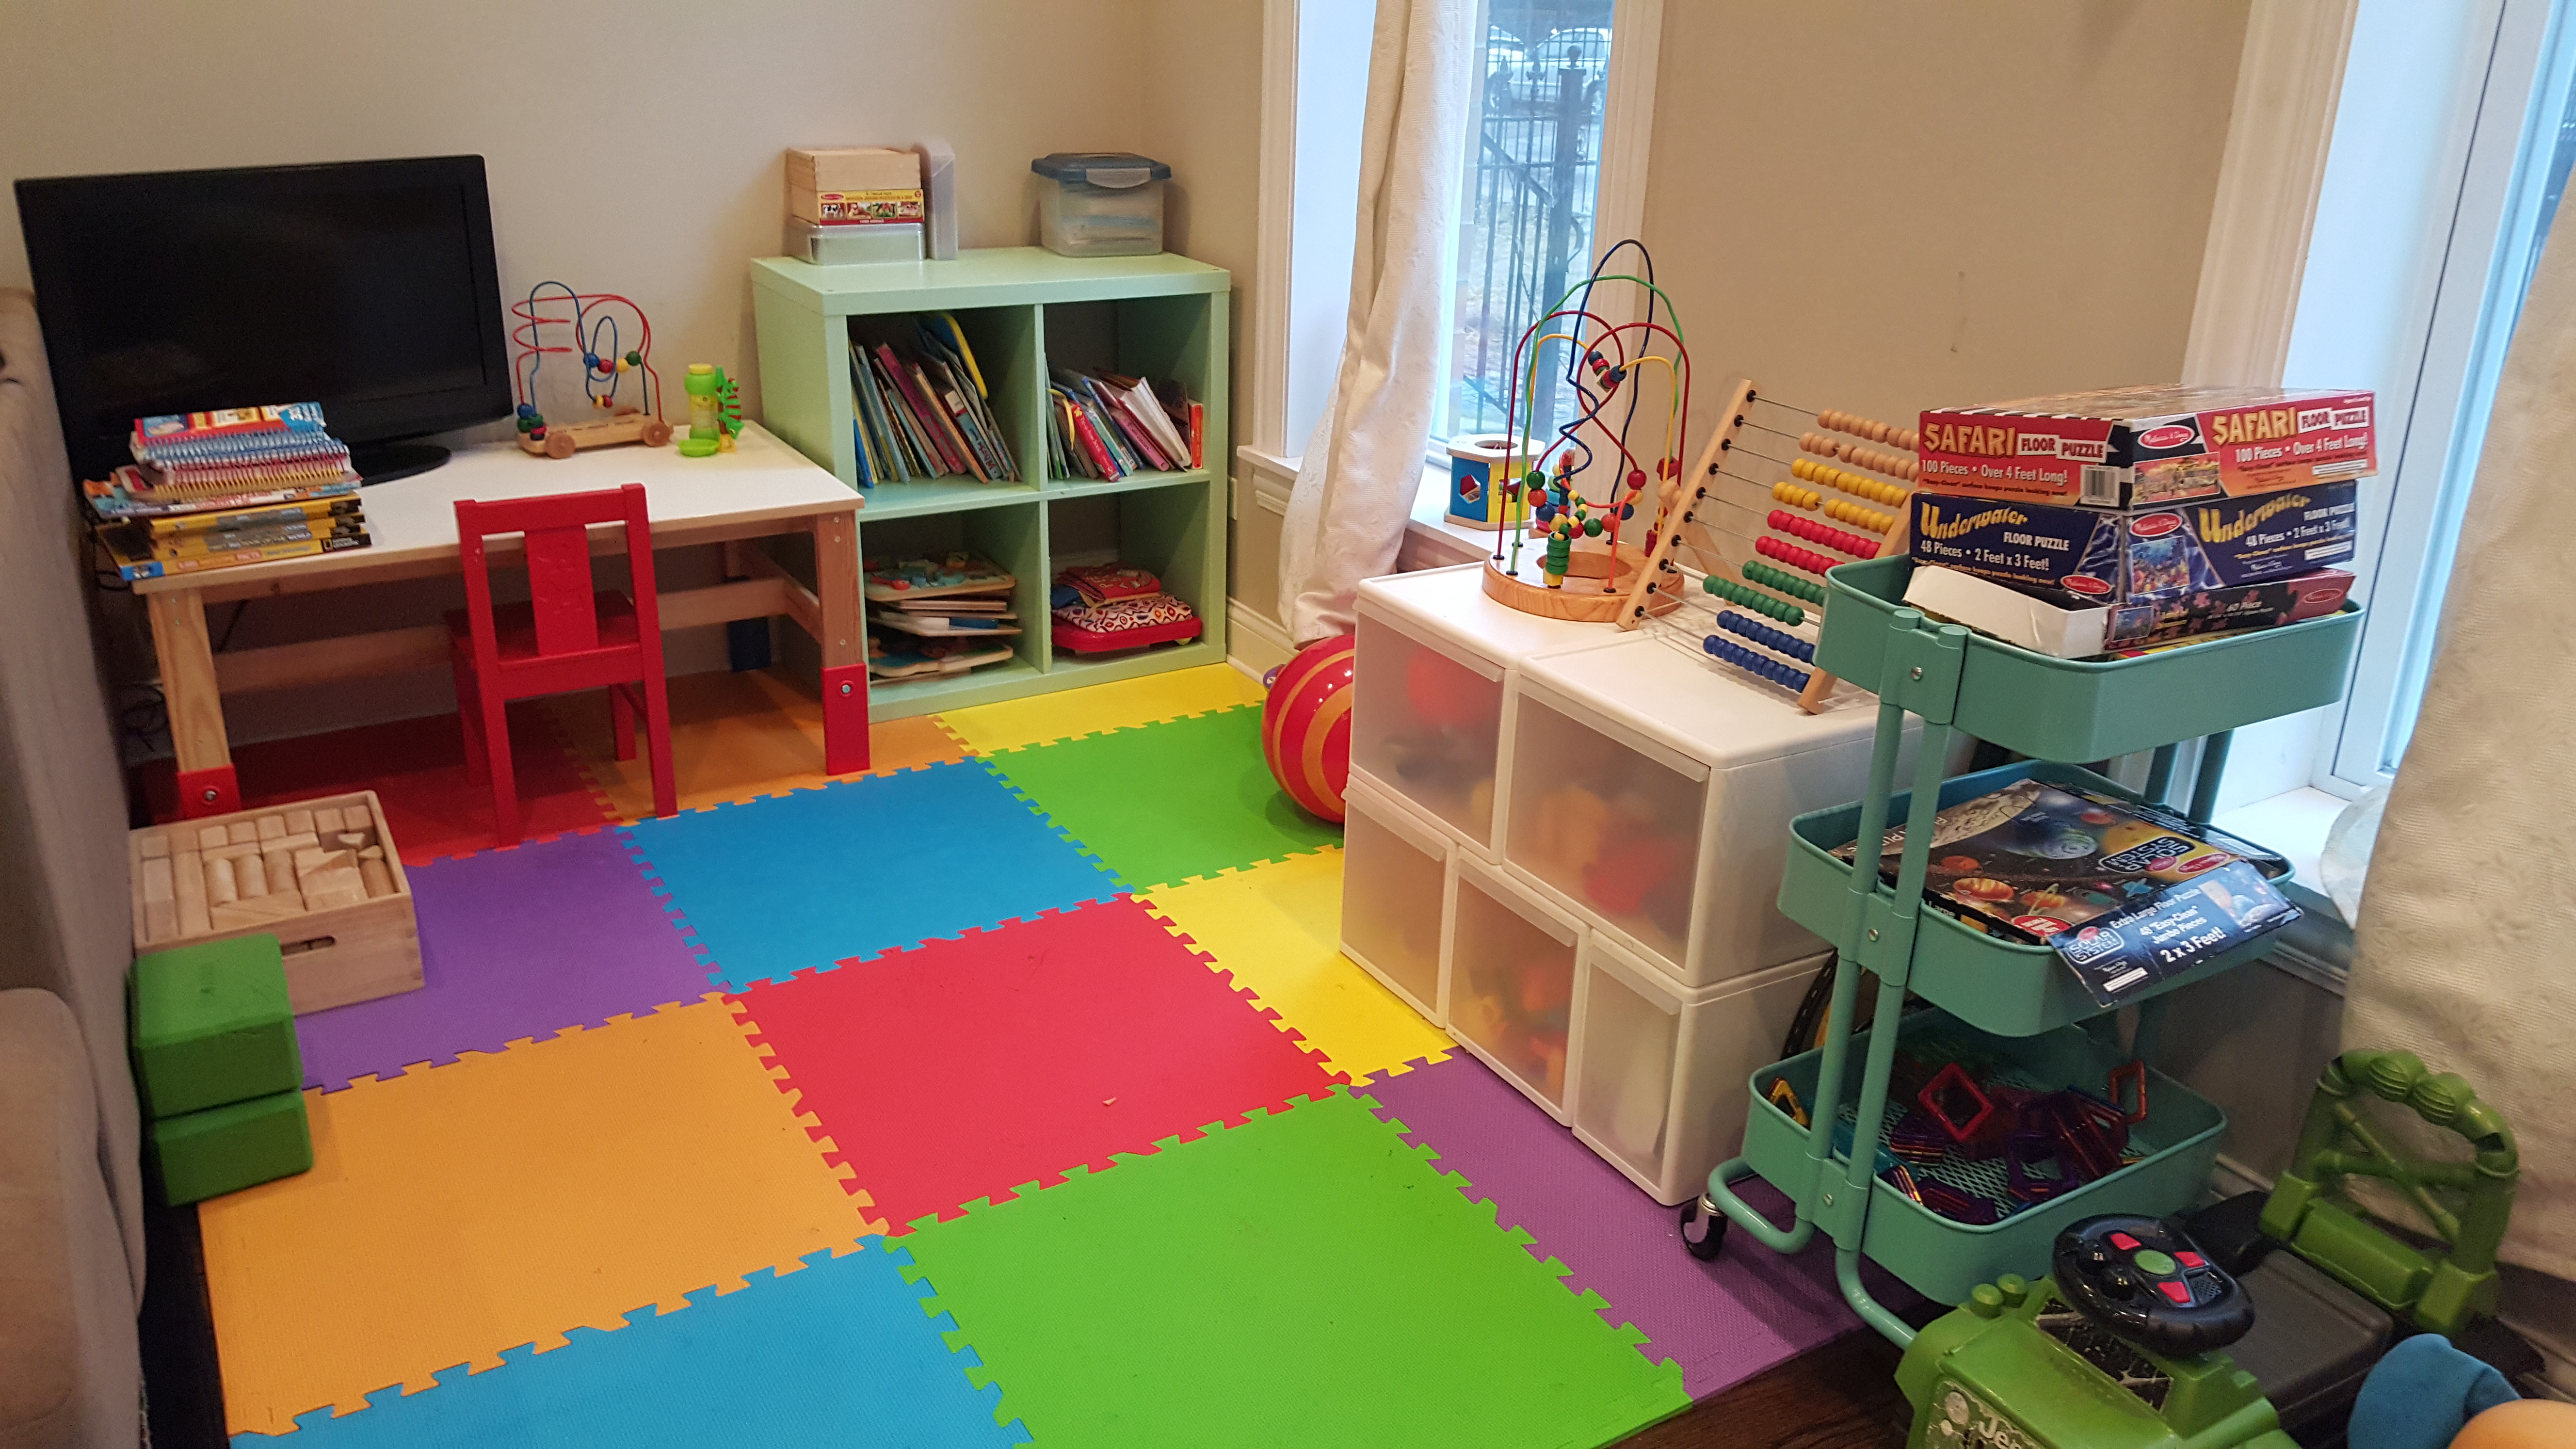 When it comes to my kids' play area,  I try to keep it small,  colorful and neat